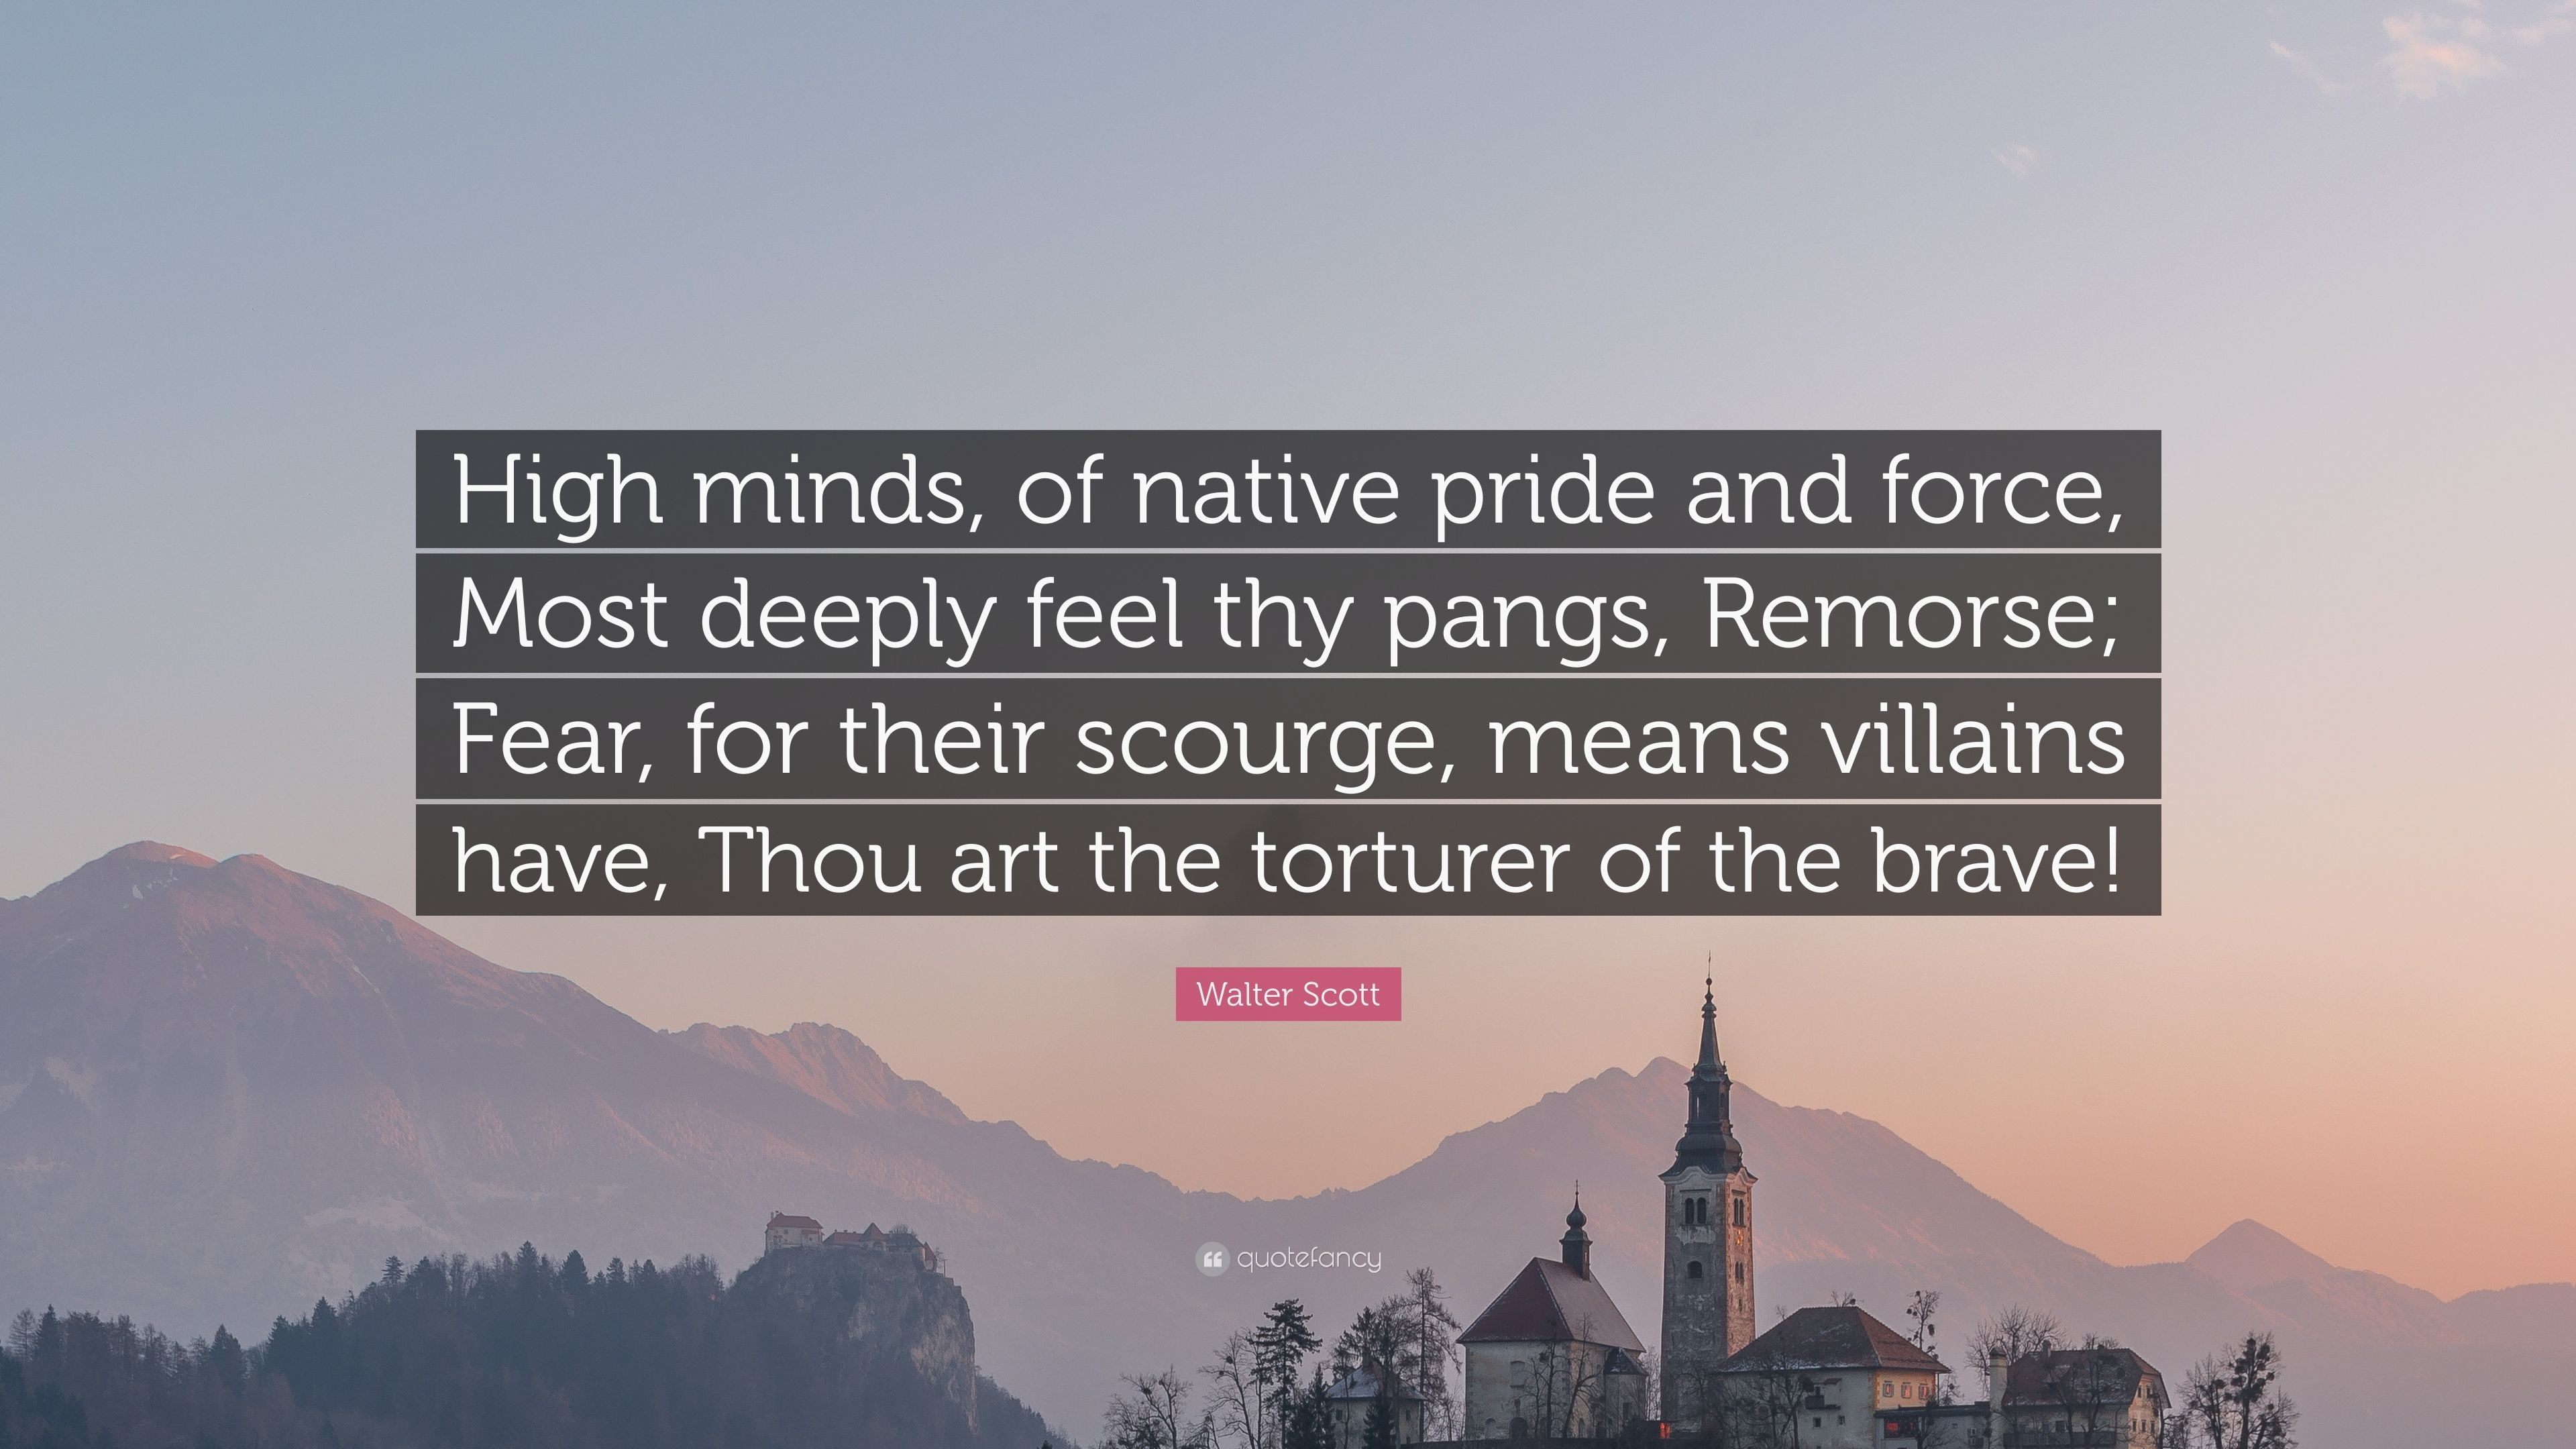 3840x2160 Walter Scott Quote: “High minds, of native pride and force, Most deeply